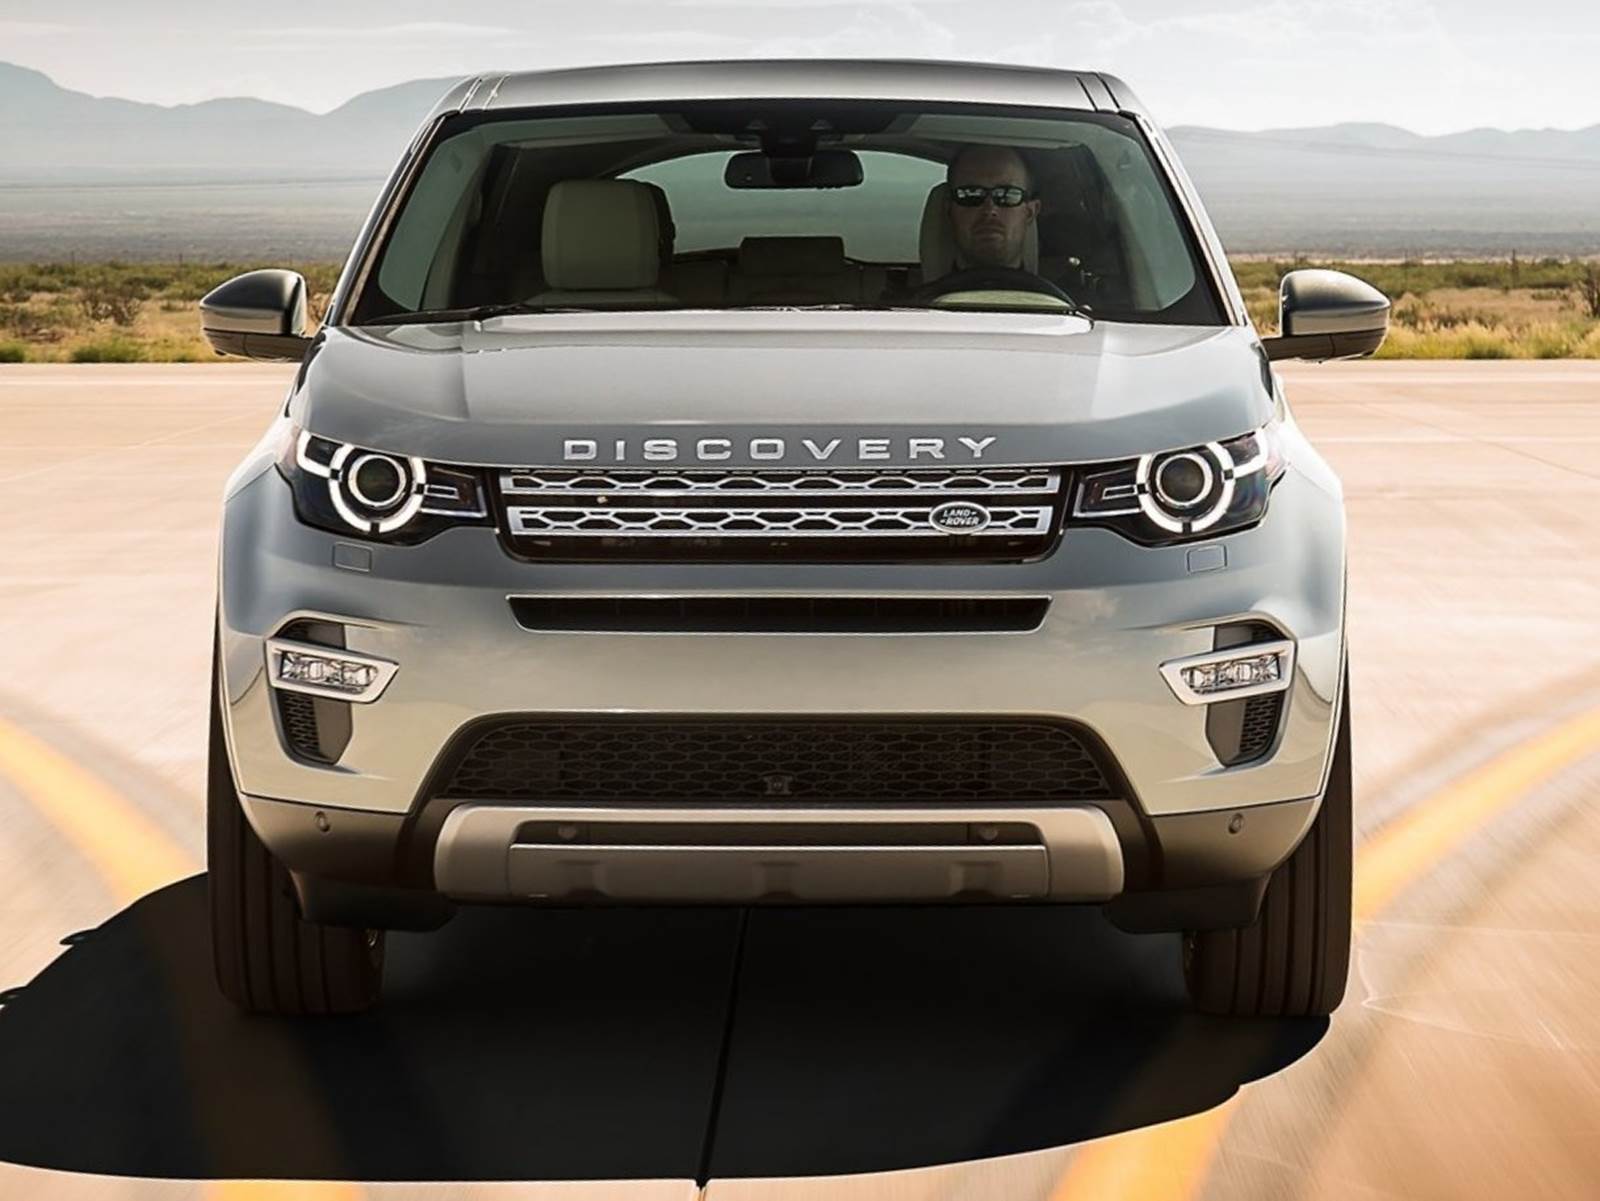 Land rover sport 2015. Ленд Ровер Дискавери 2015. Лэнд Ровер Дискавери, 2015. Ленд Ровер Дискавери спорт 2015. Land Rover Discovery Sport 2015.